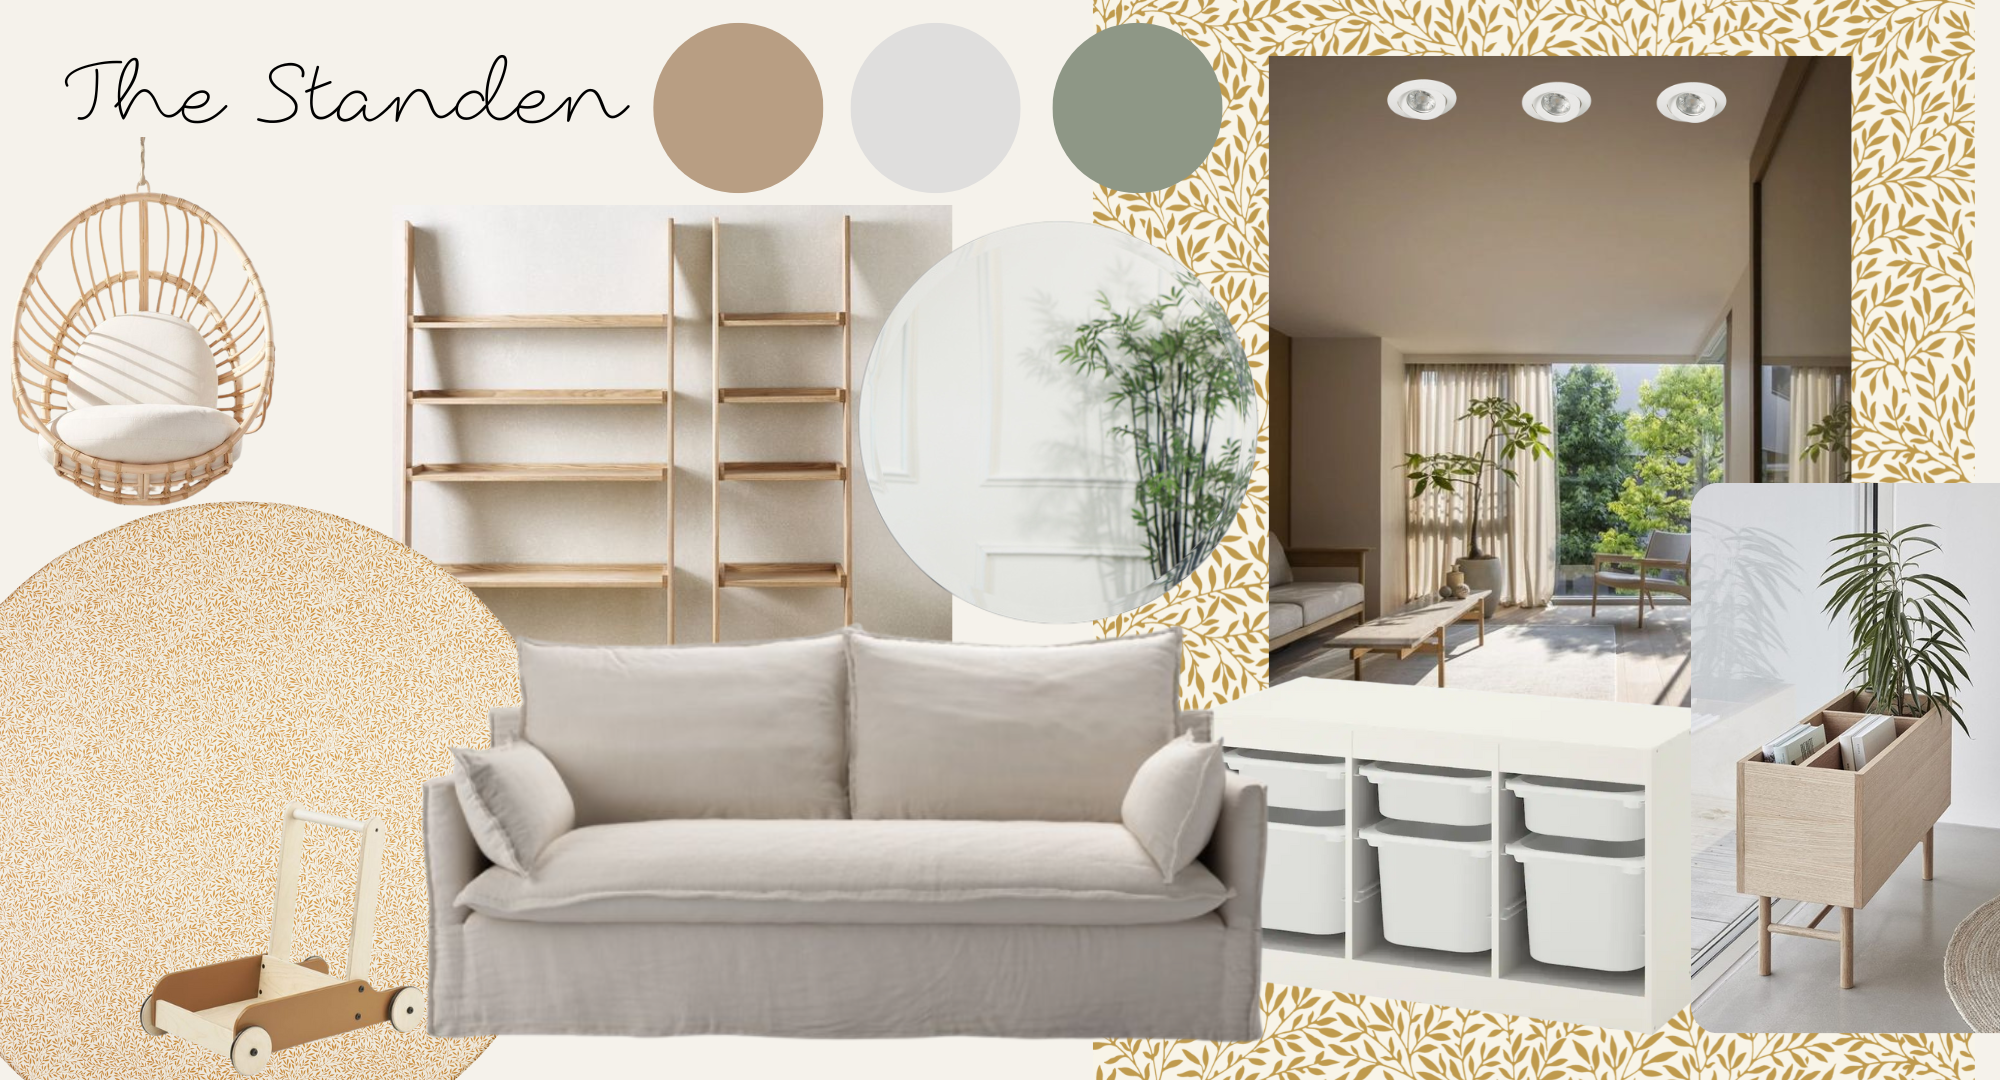 The Standen Totter + Tumble styling board